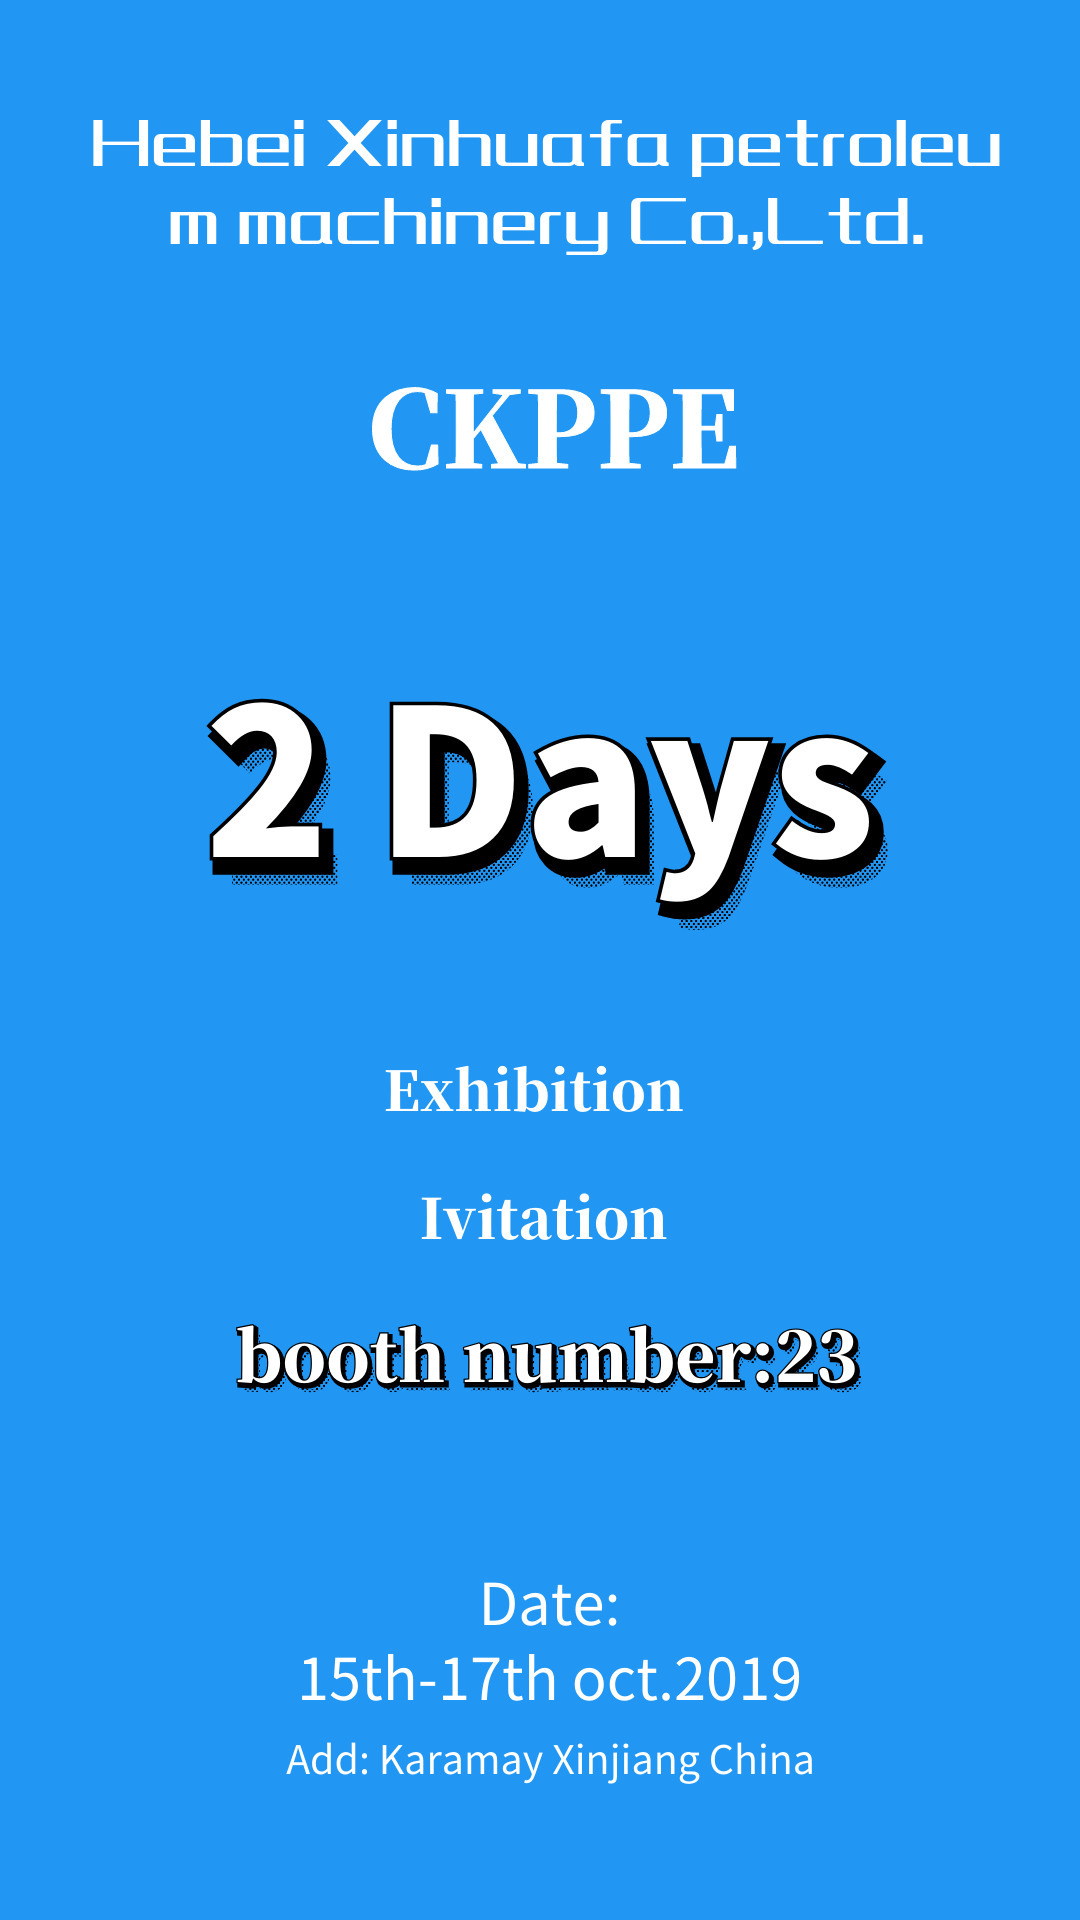 CKPPE Exhibition